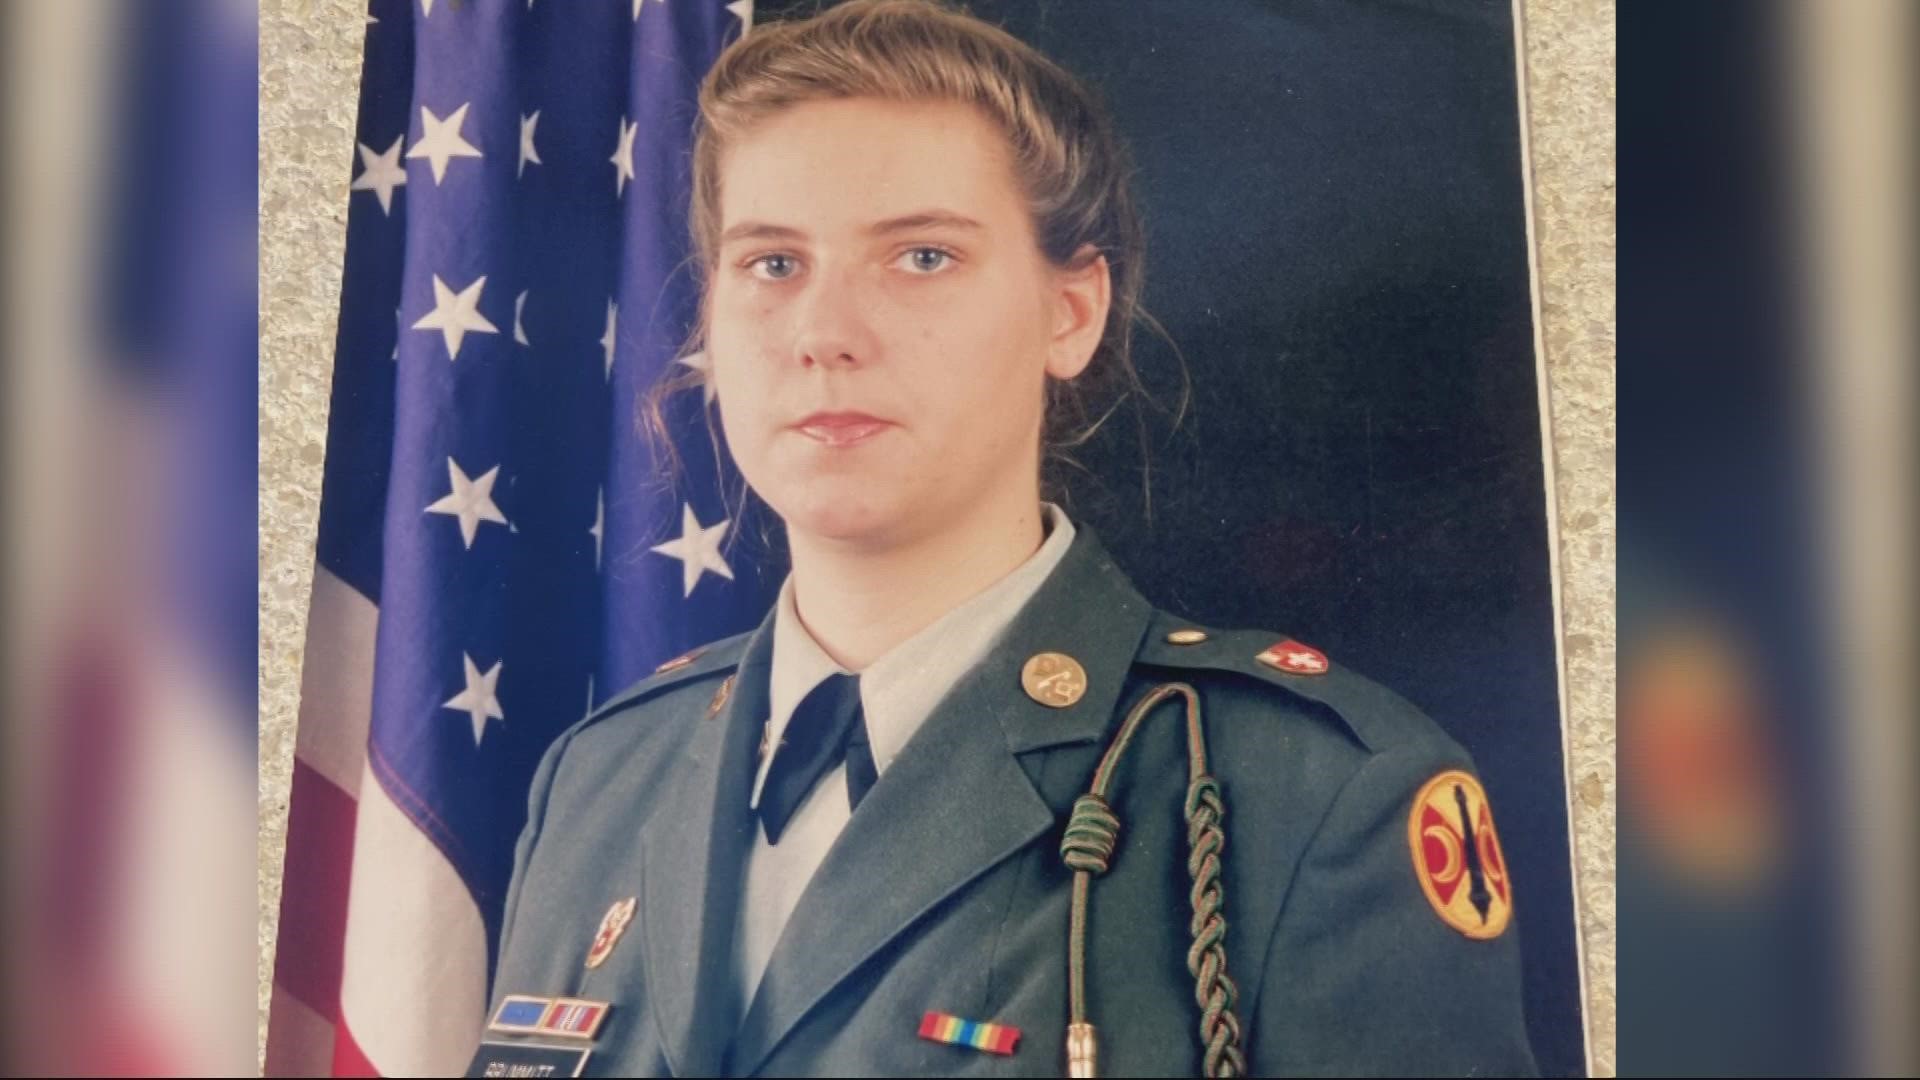 Before Jackie Scheel was leading her team of over 200 water and wastewater responders during Tropical storm Nicole, she was a U.S. Army combat signaler.